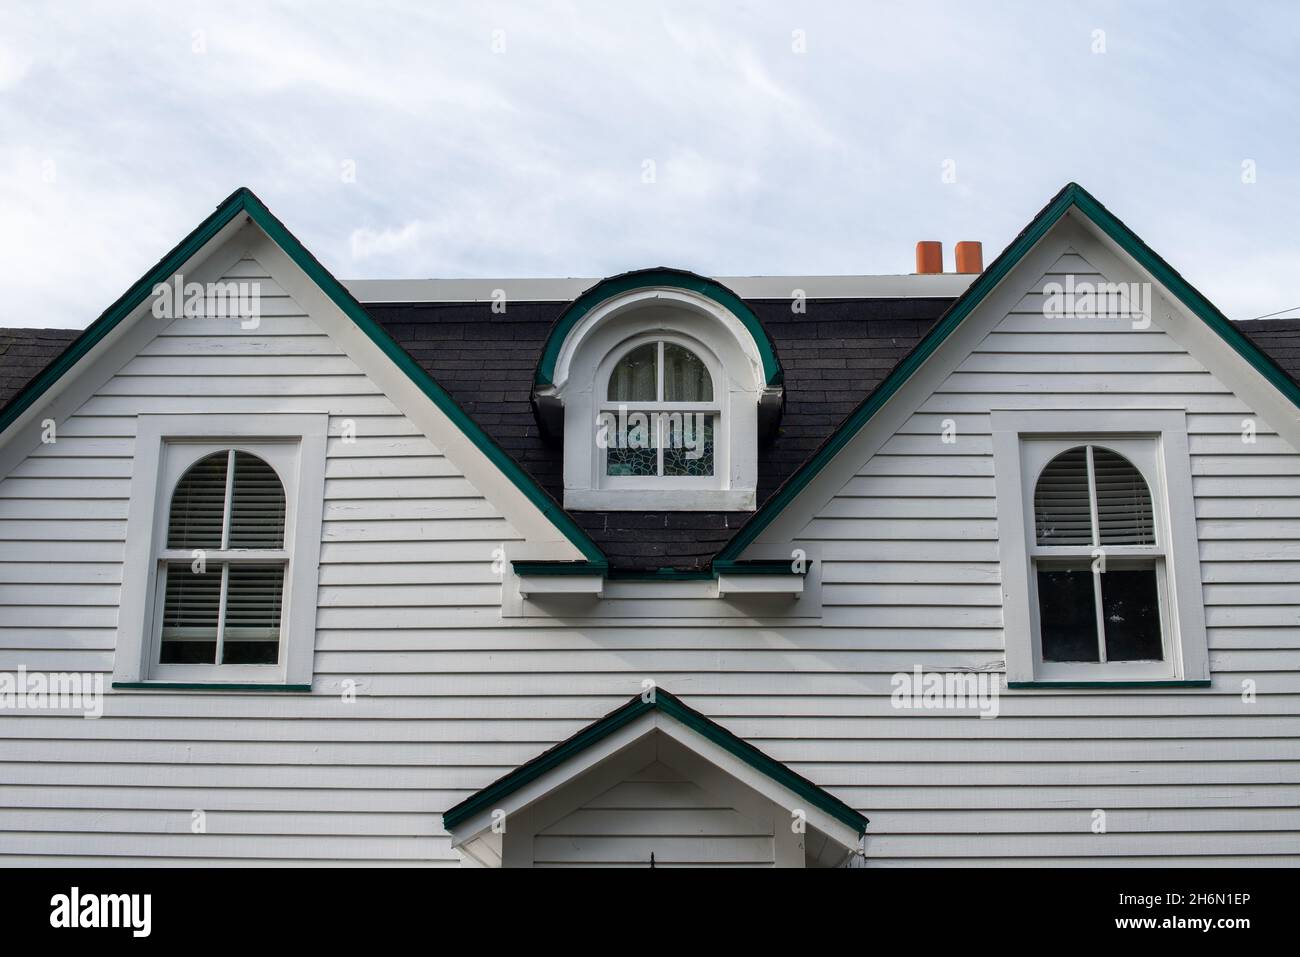 A white wood clapboard siding vintage house with multiple windows. The center window has a curved dormer over the closed glass window in the black Stock Photo